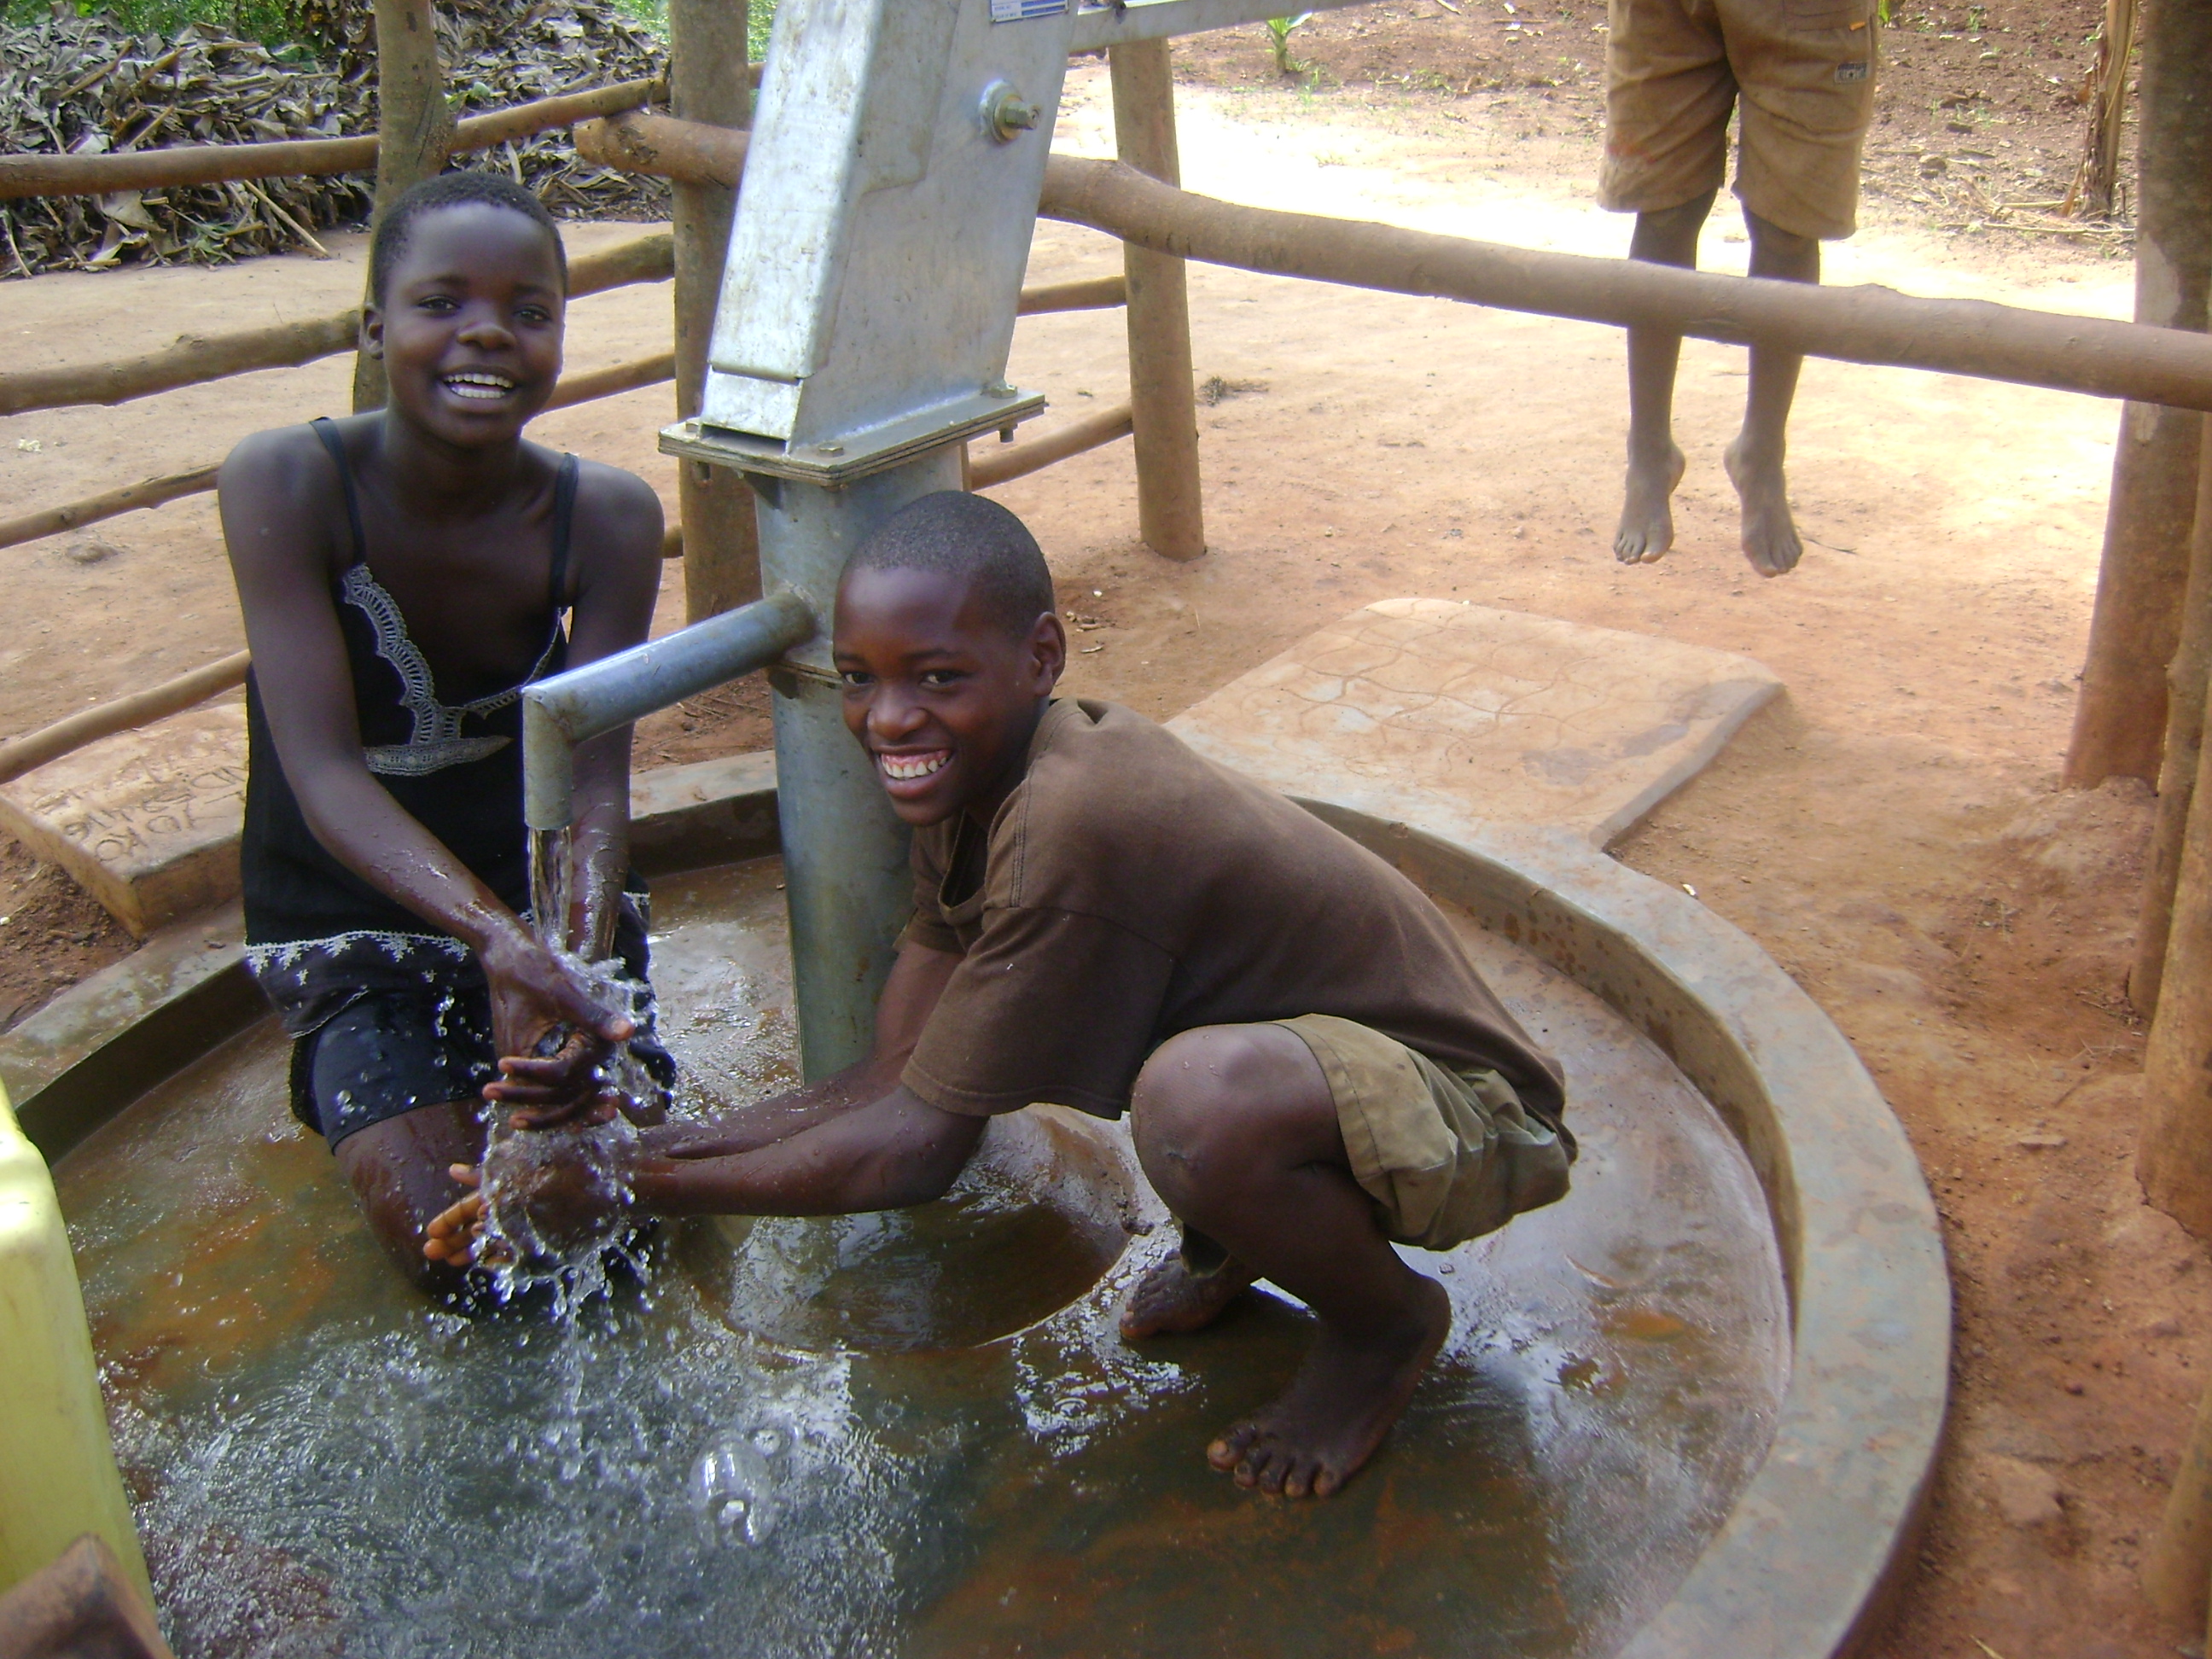 Access to safe water